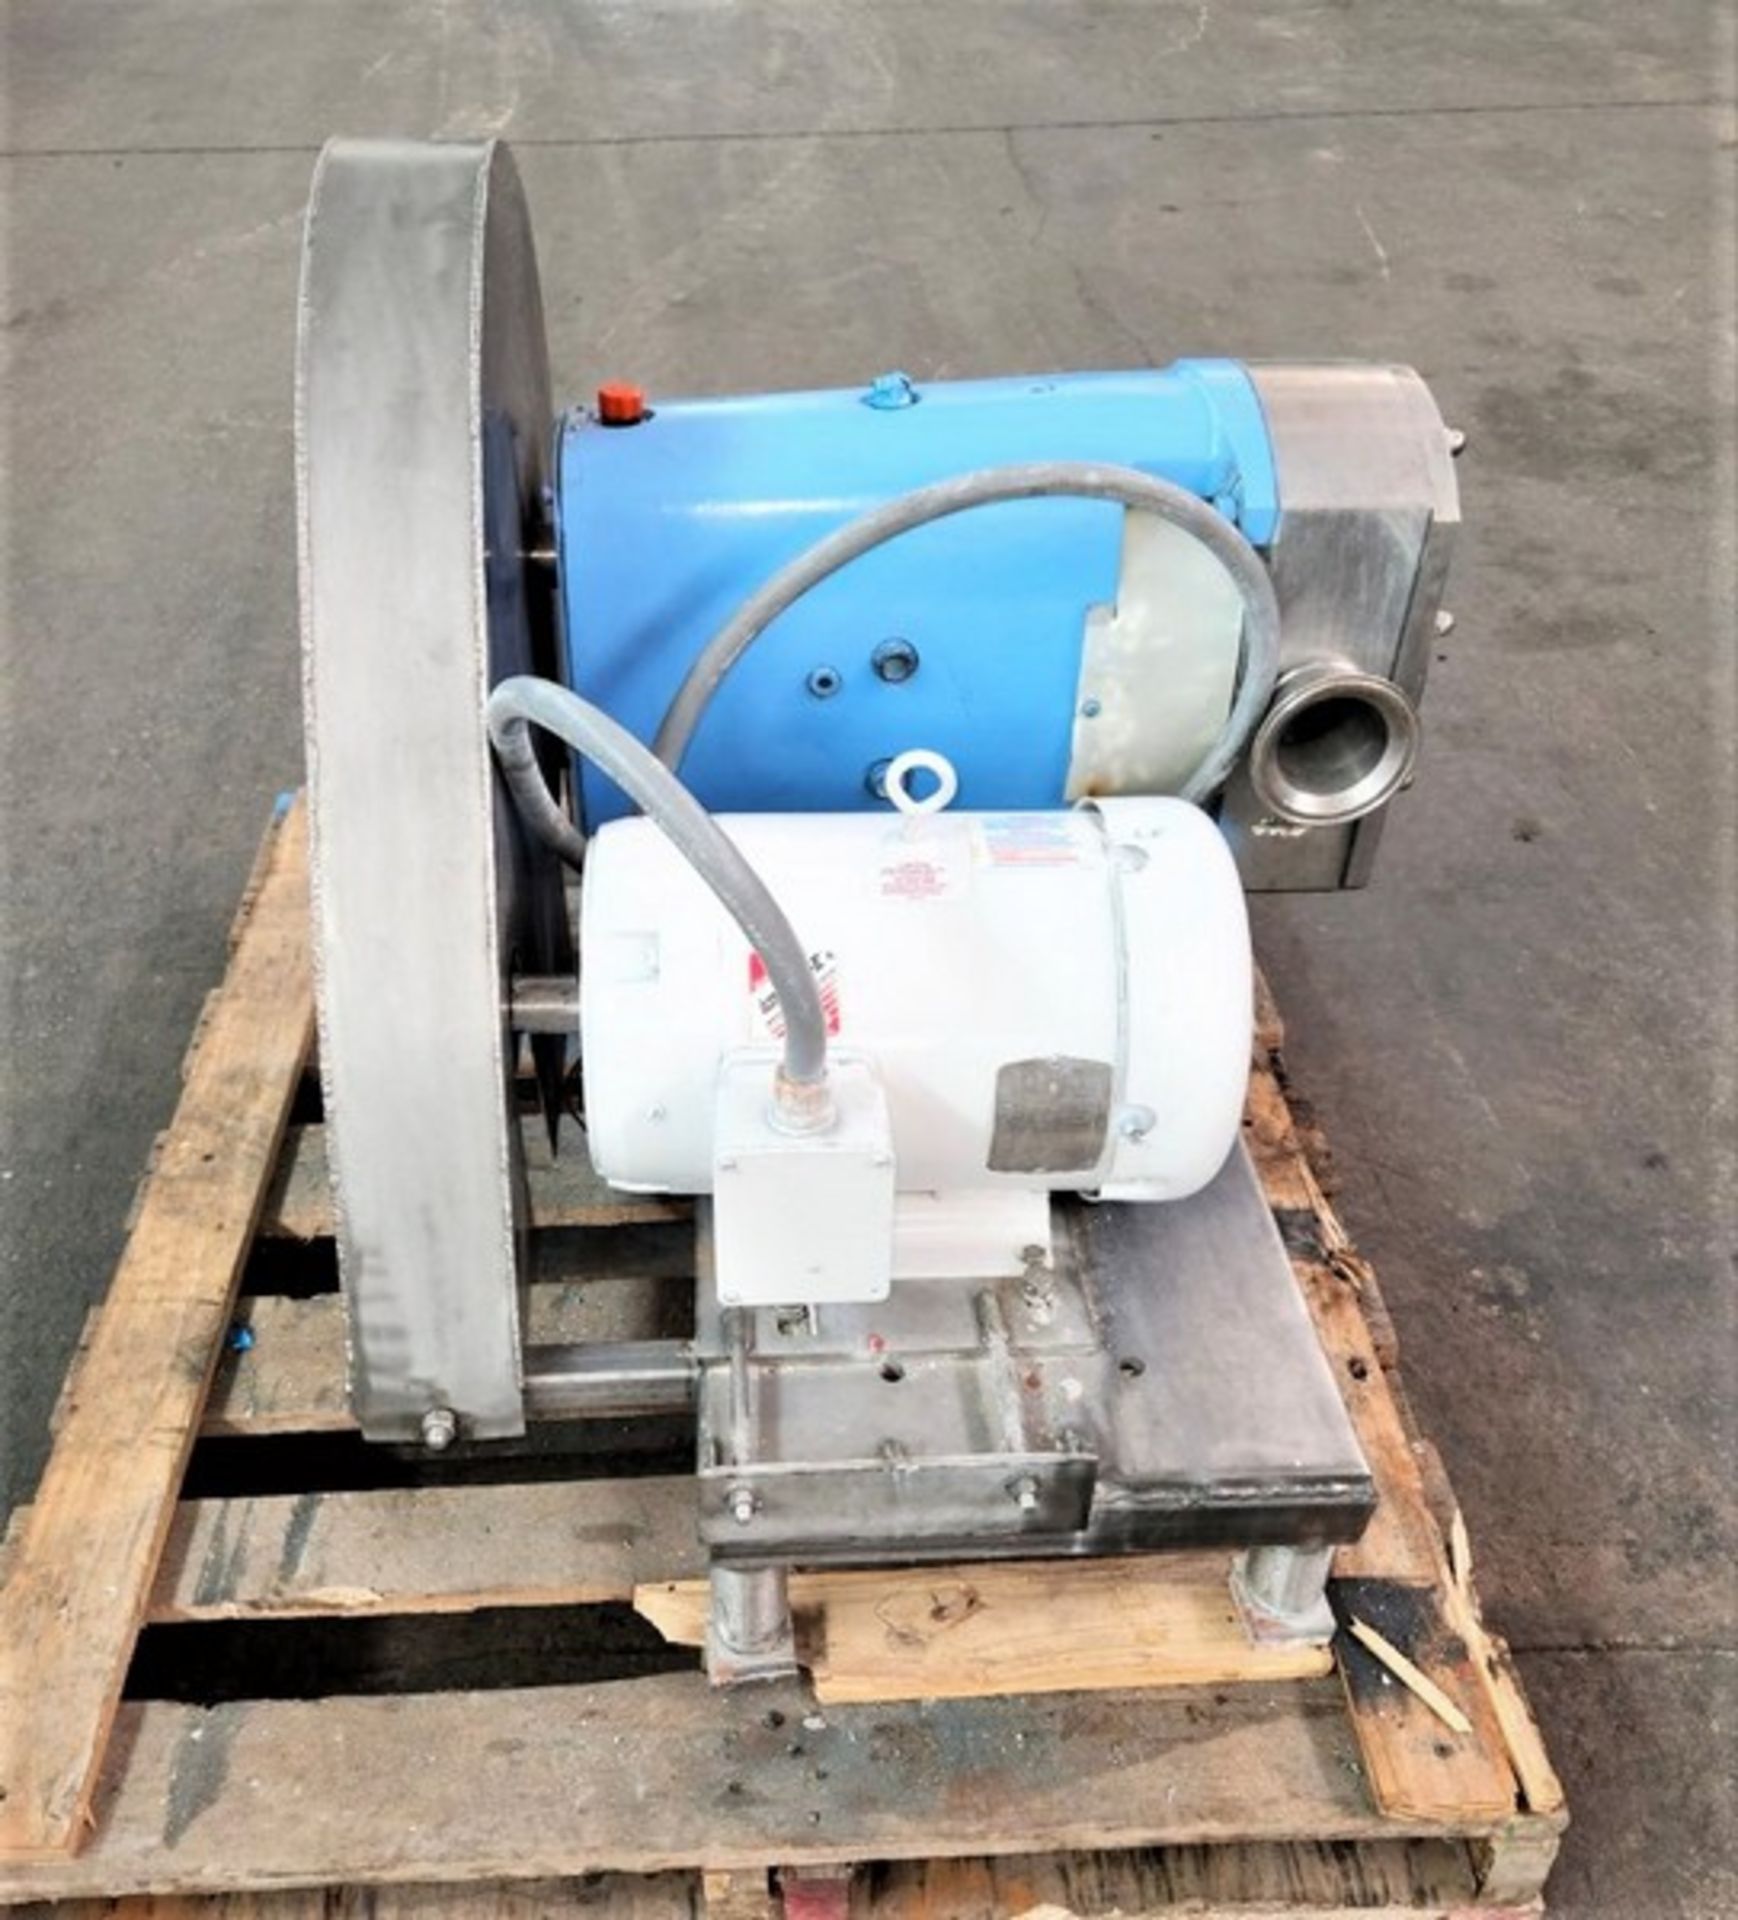 G & H (Alfa Laval) 7.5 hp 4" S/S Sanitary Positive Displacement Pump, Model 822, S/N 95-8-50174 with - Image 2 of 15